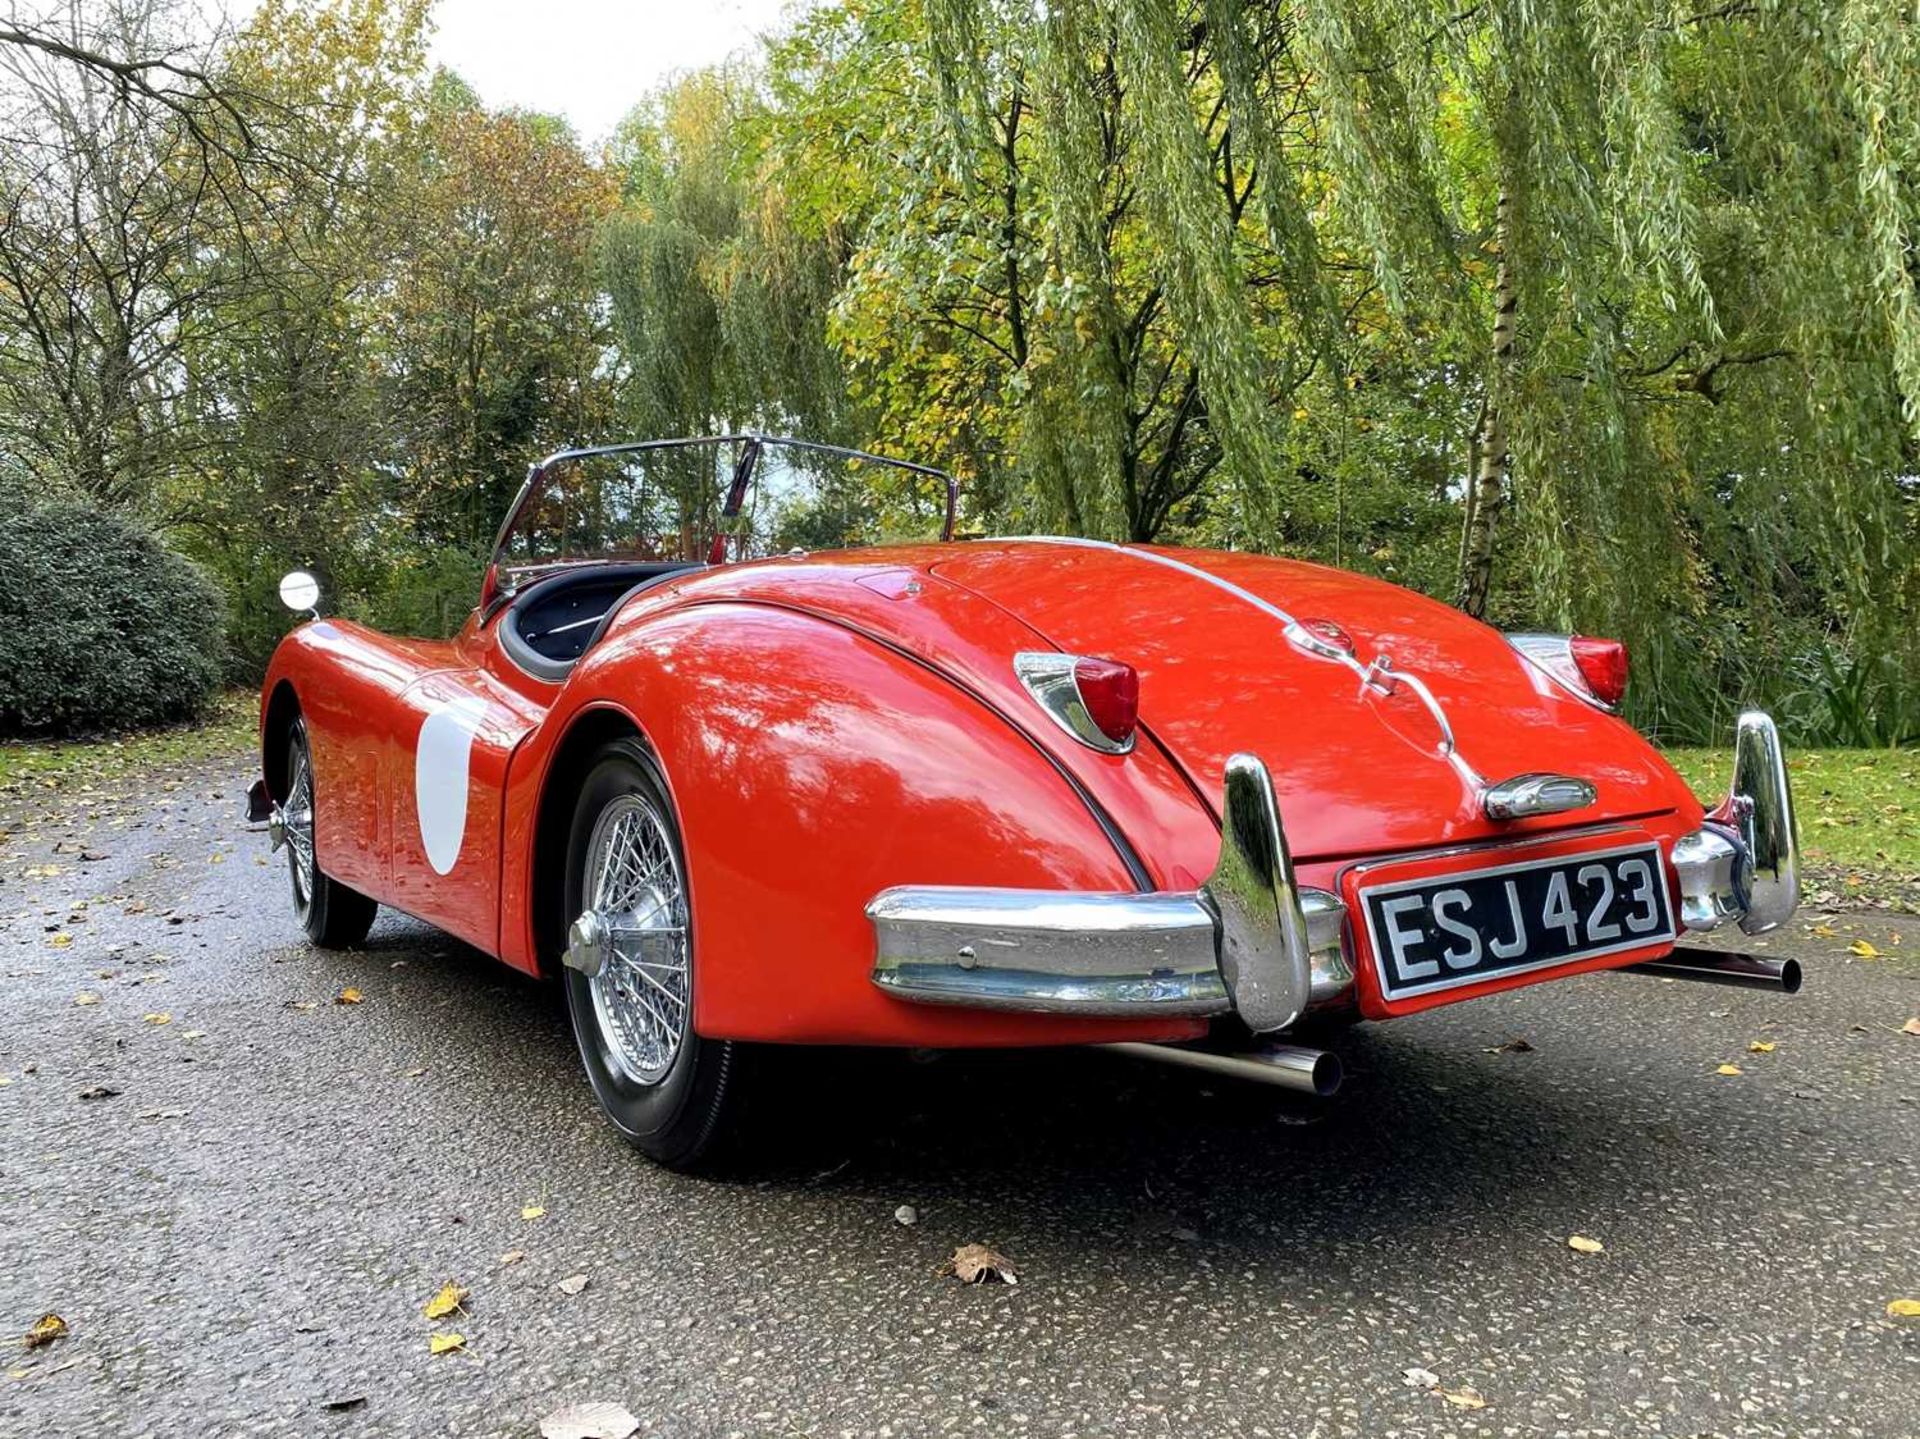 1956 Jaguar XK140 SE Roadster A matching-numbers, restored 'Special Equipment' roadster. - Image 24 of 98